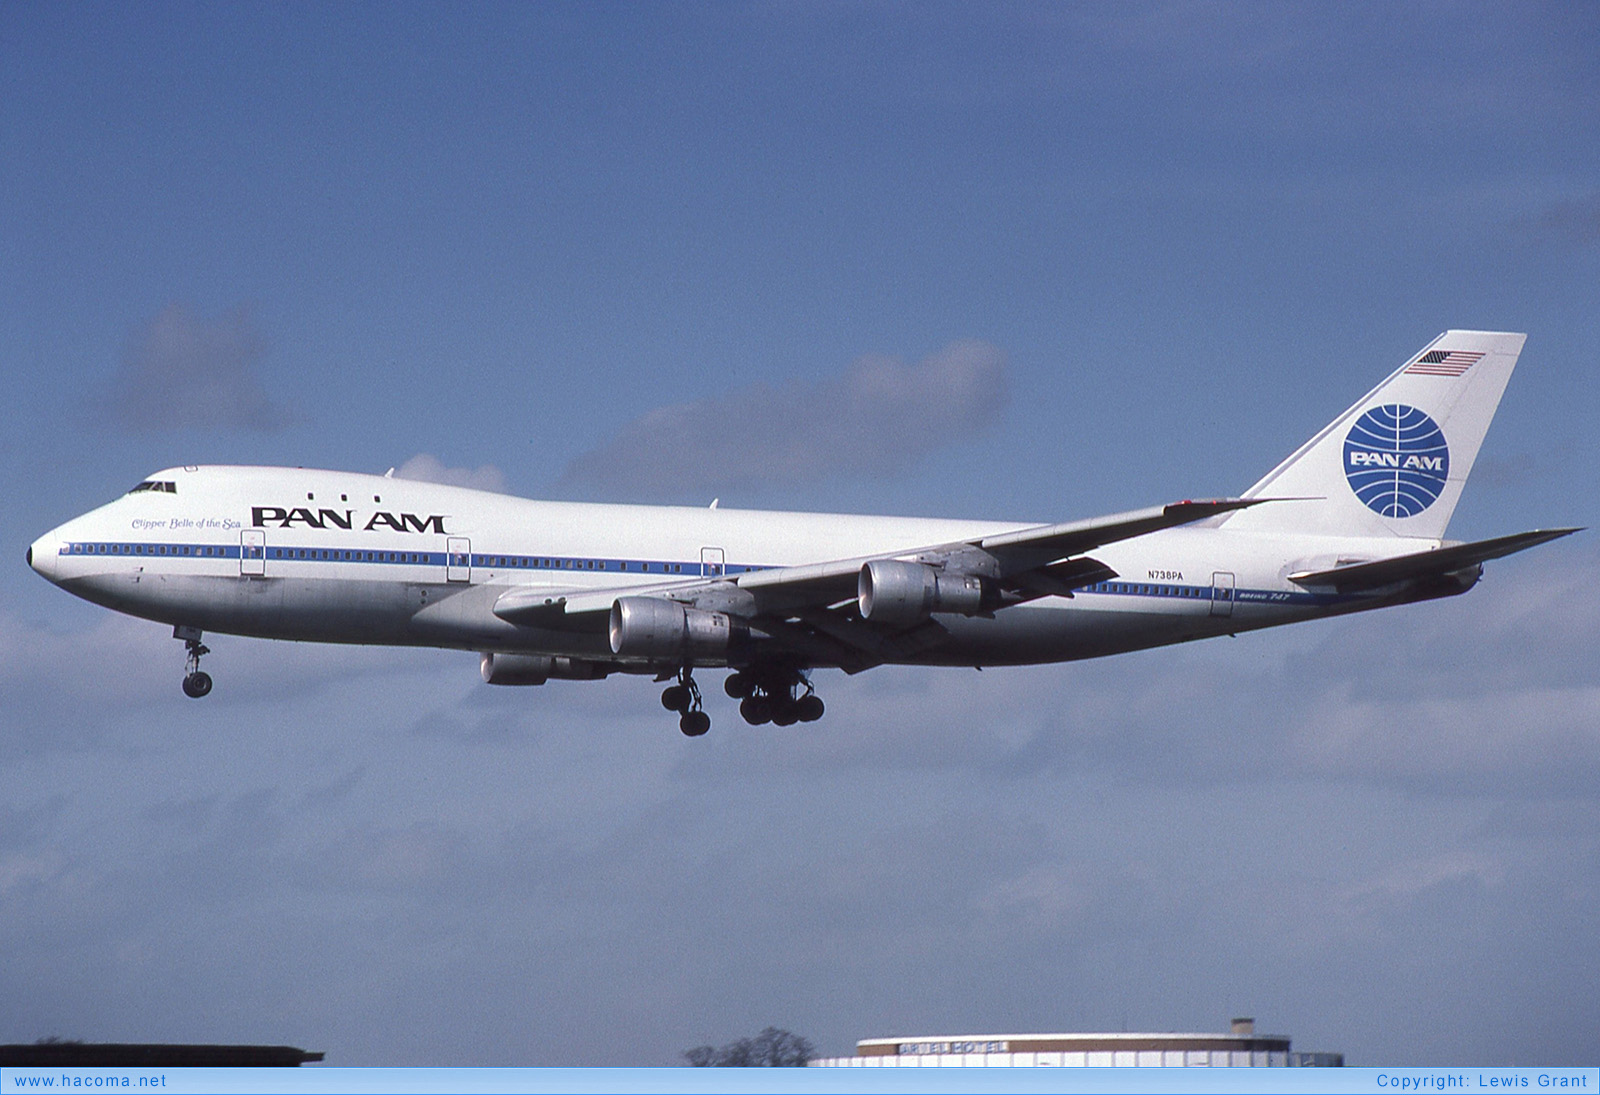 Photo of N738PA - Pan Am Clipper Defender / Belle of the Sea - London Heathrow Airport - Mar 28, 1981